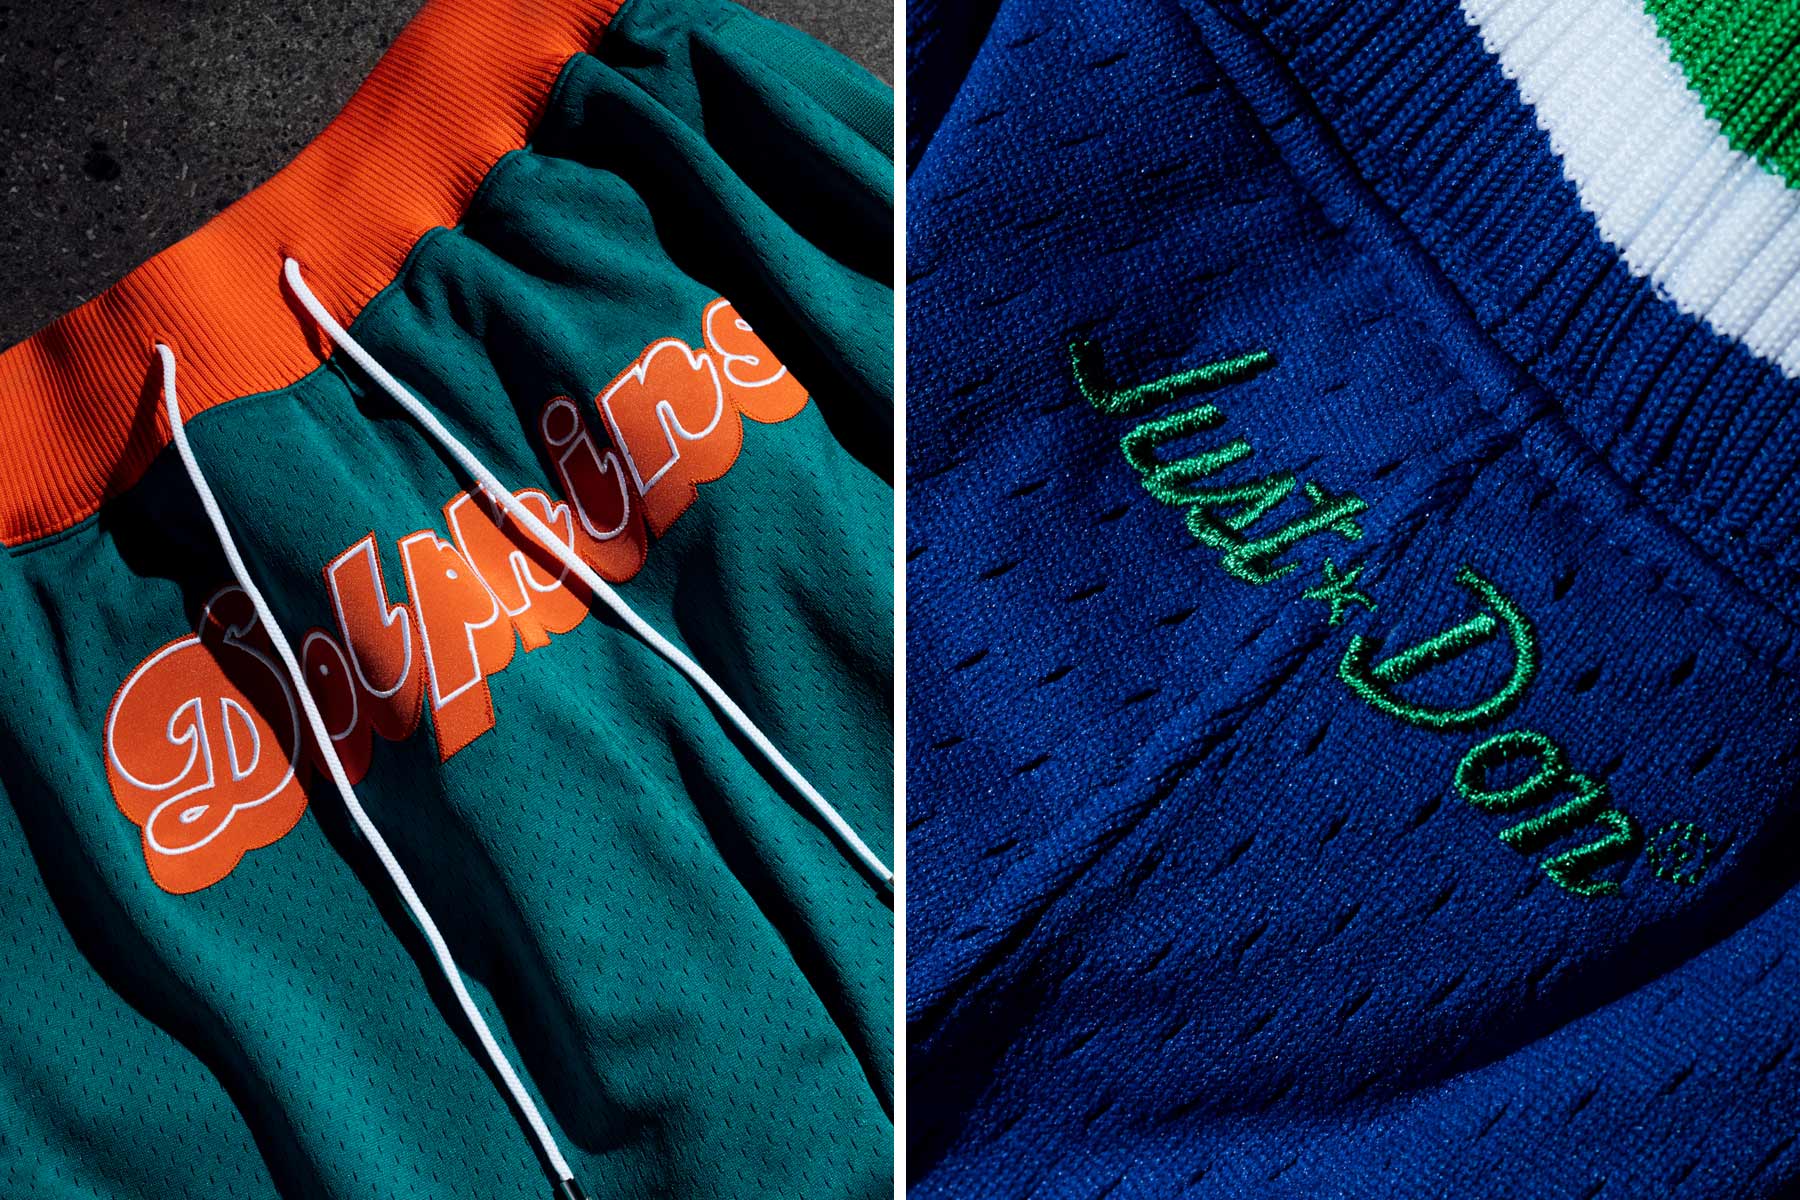 Mitchell & Ness x Just Don Cooperstown New York Mets Shorts